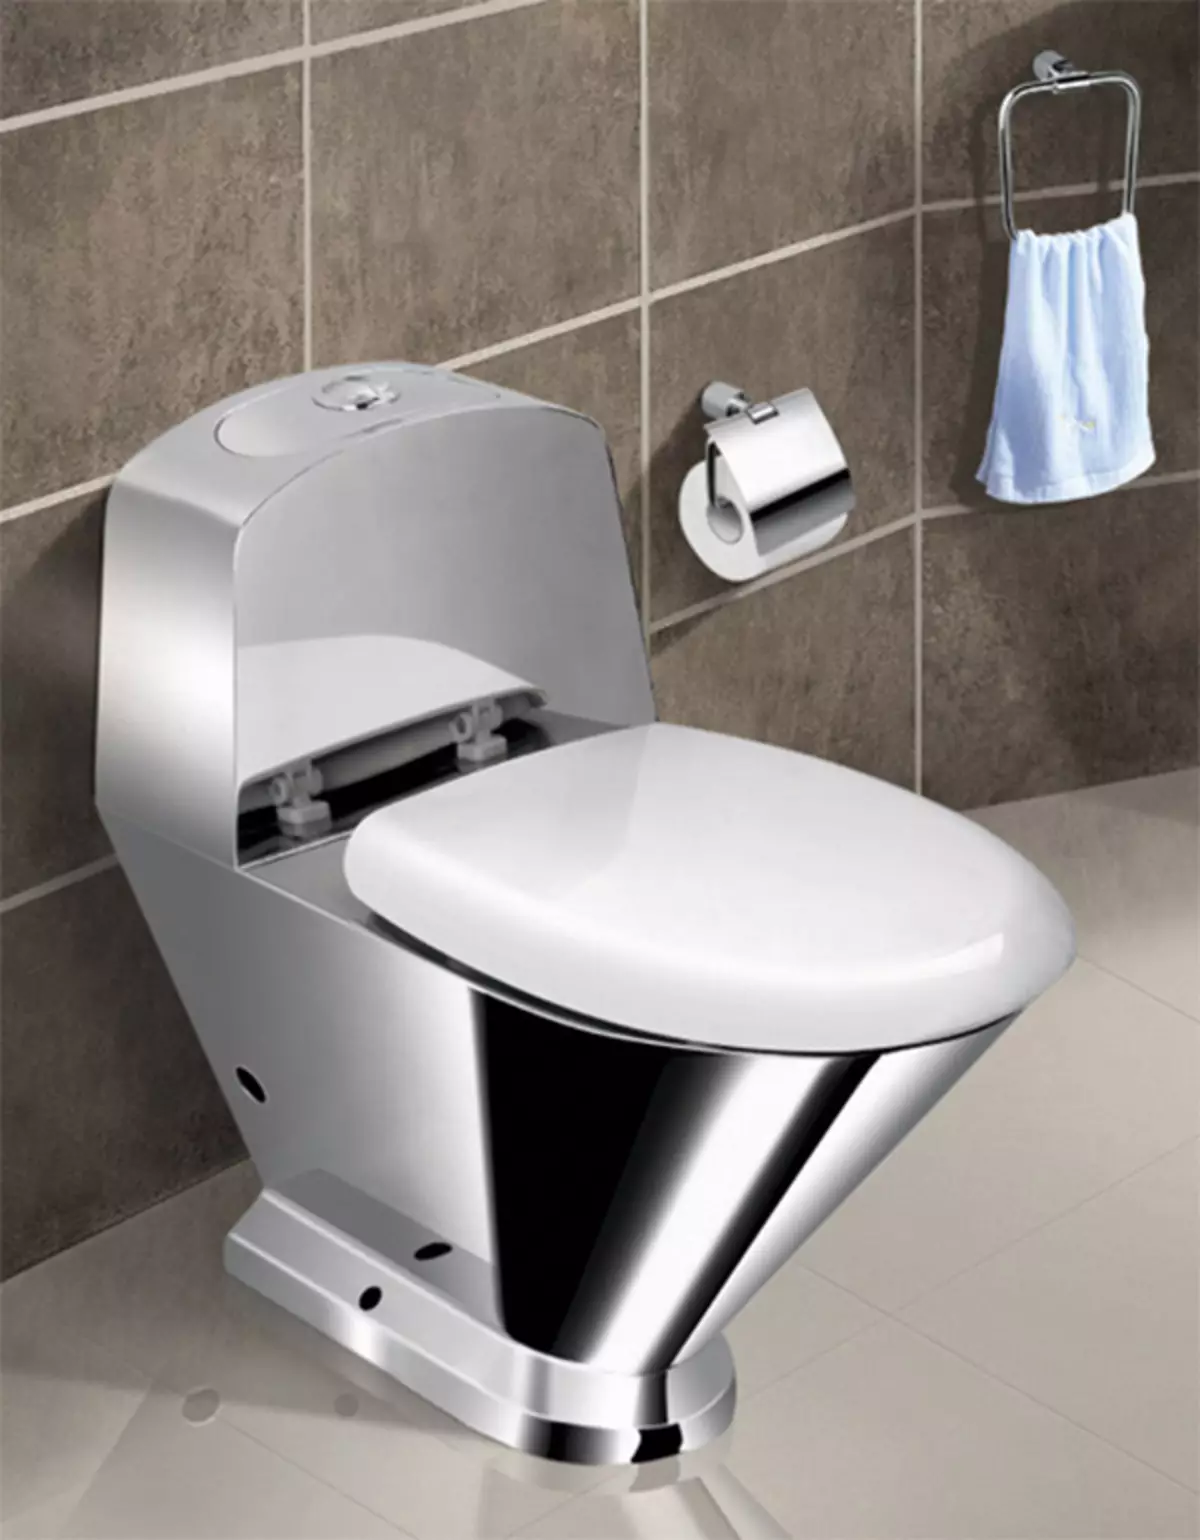 Little toilets: the dimensions of mini-toilet bowls with a tank for a small-sized toilet. Selection of adult small toilet 10484_19